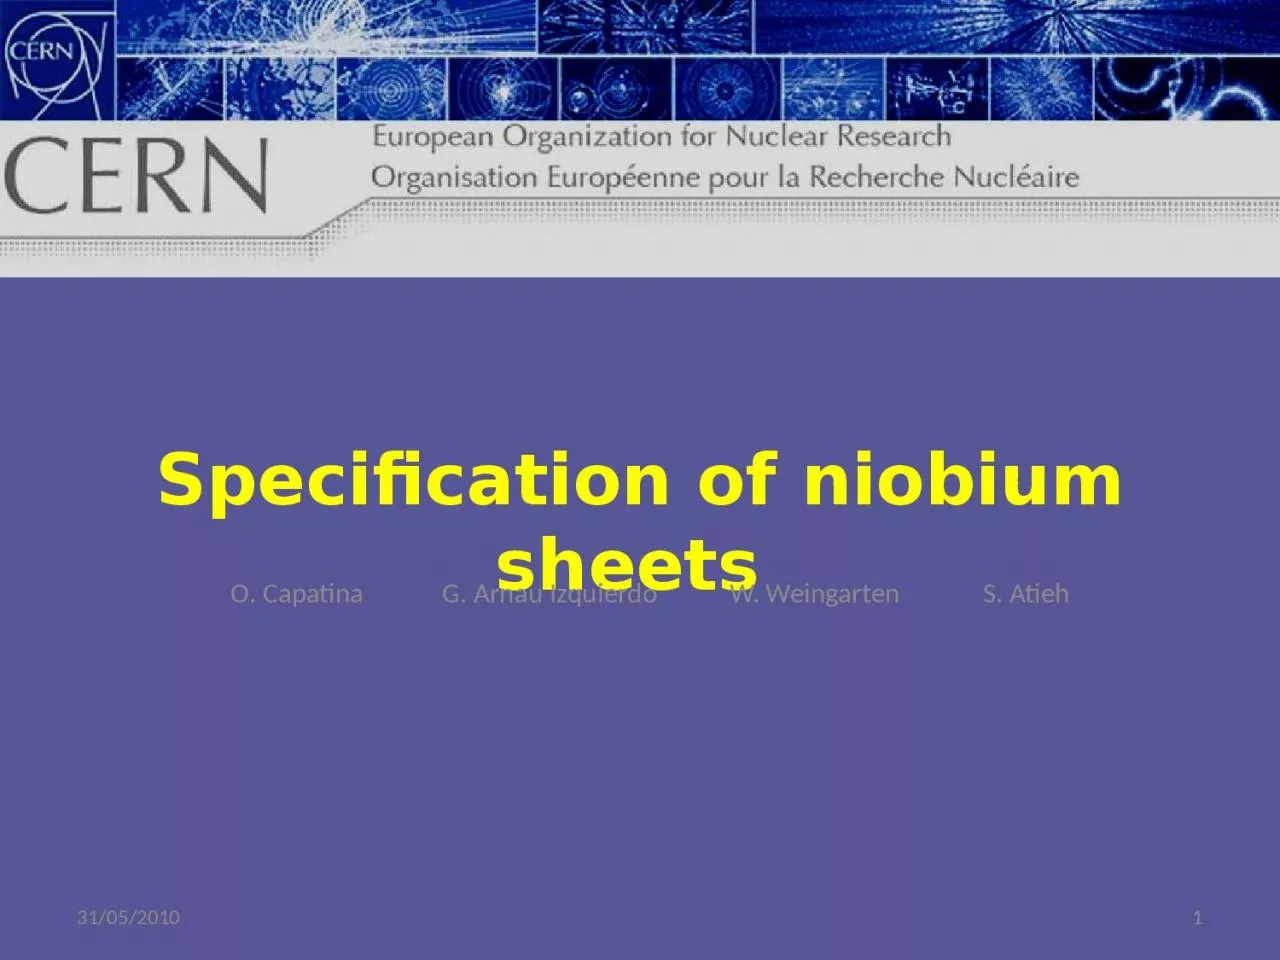 Specification of niobium sheets